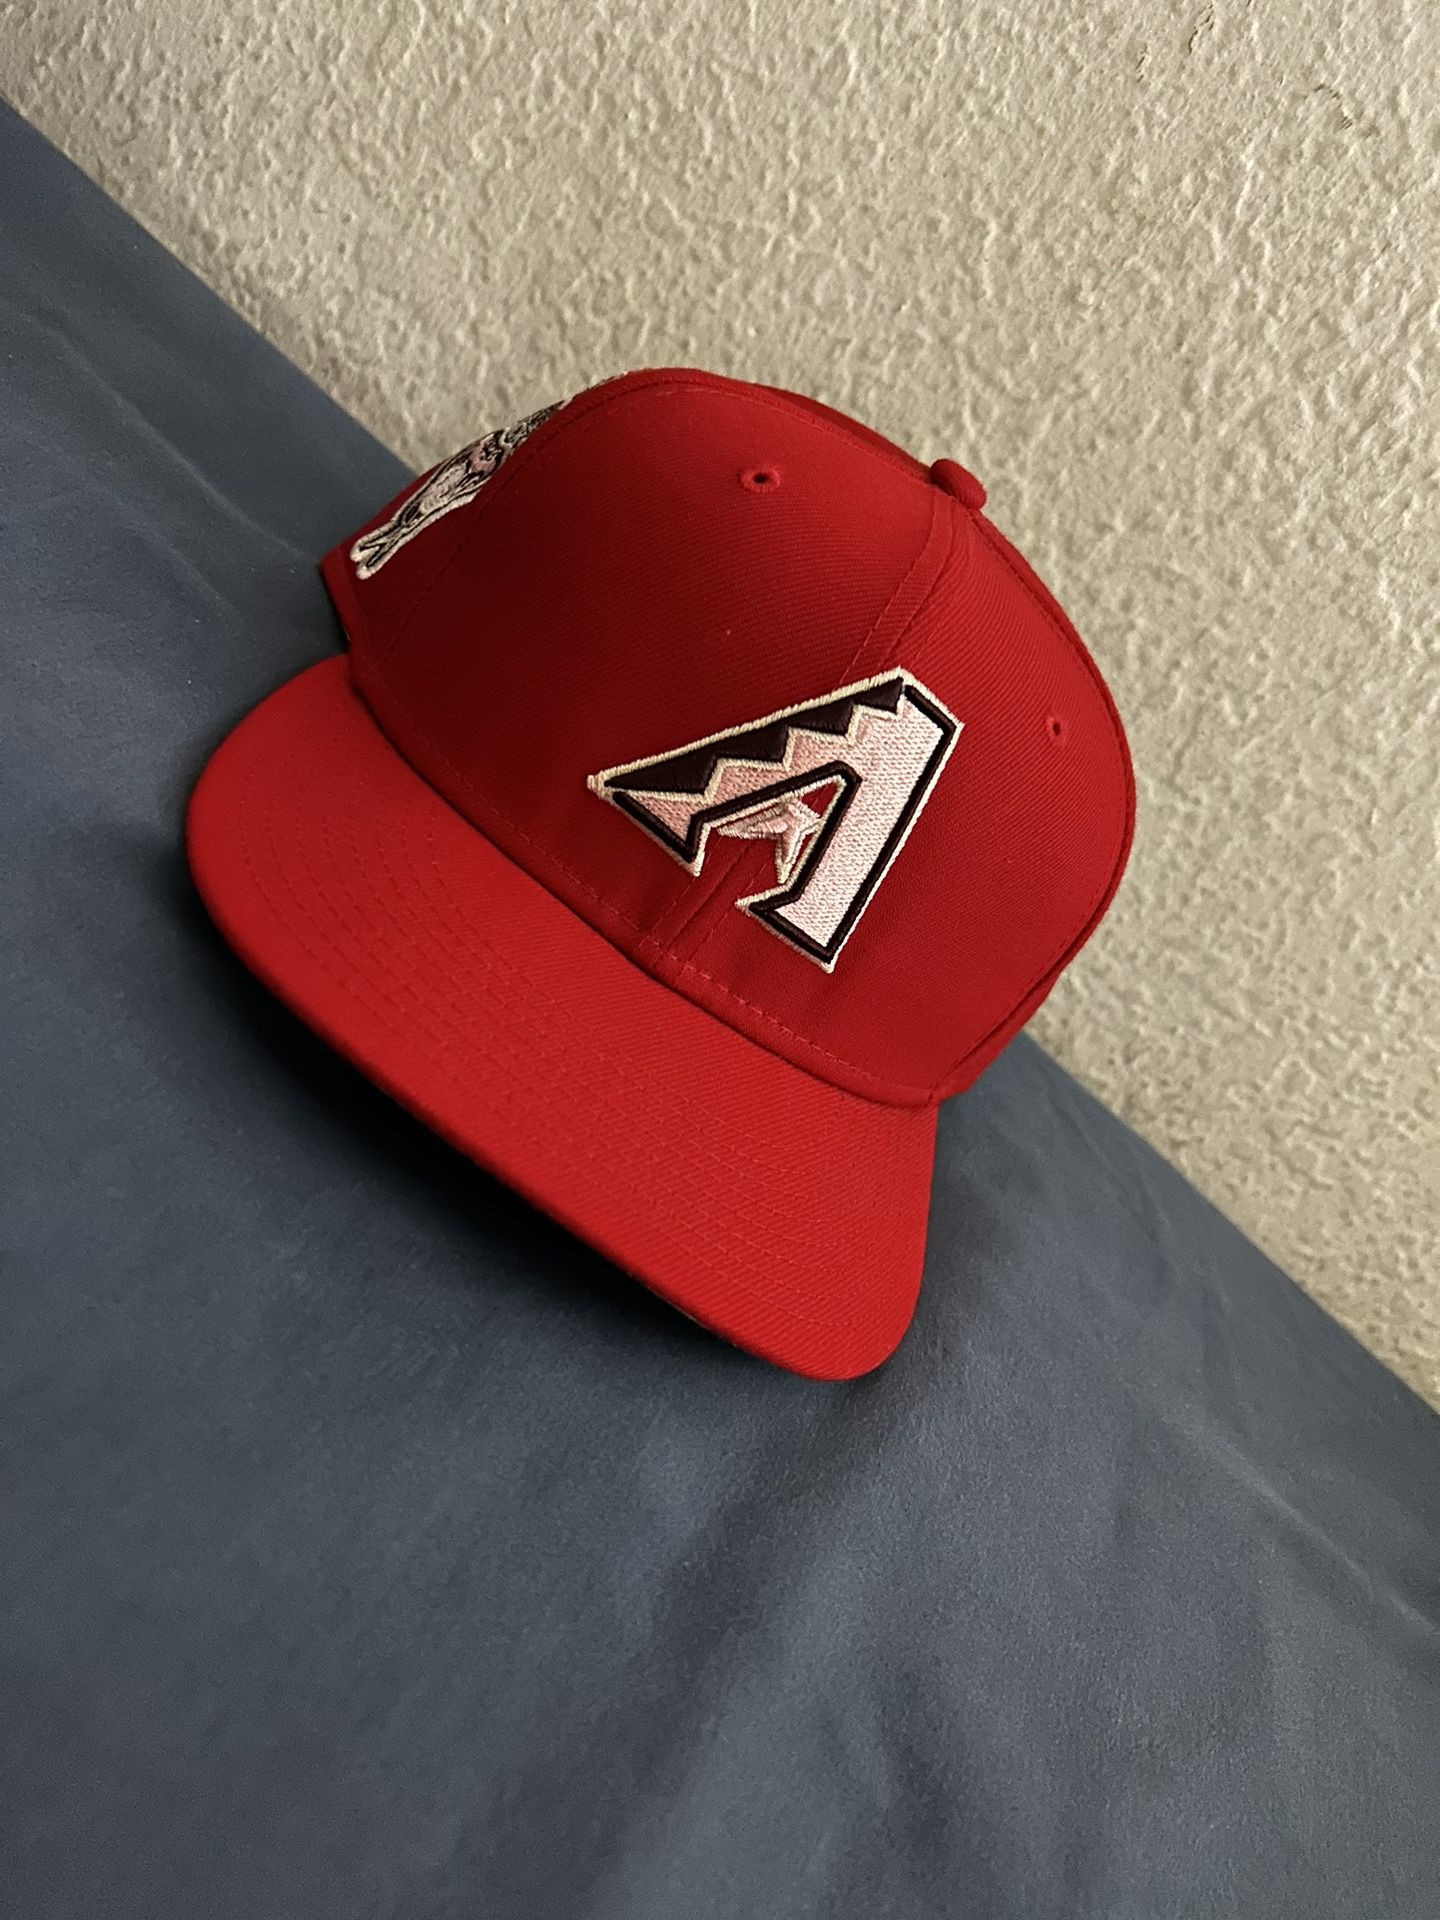 Fitted hat